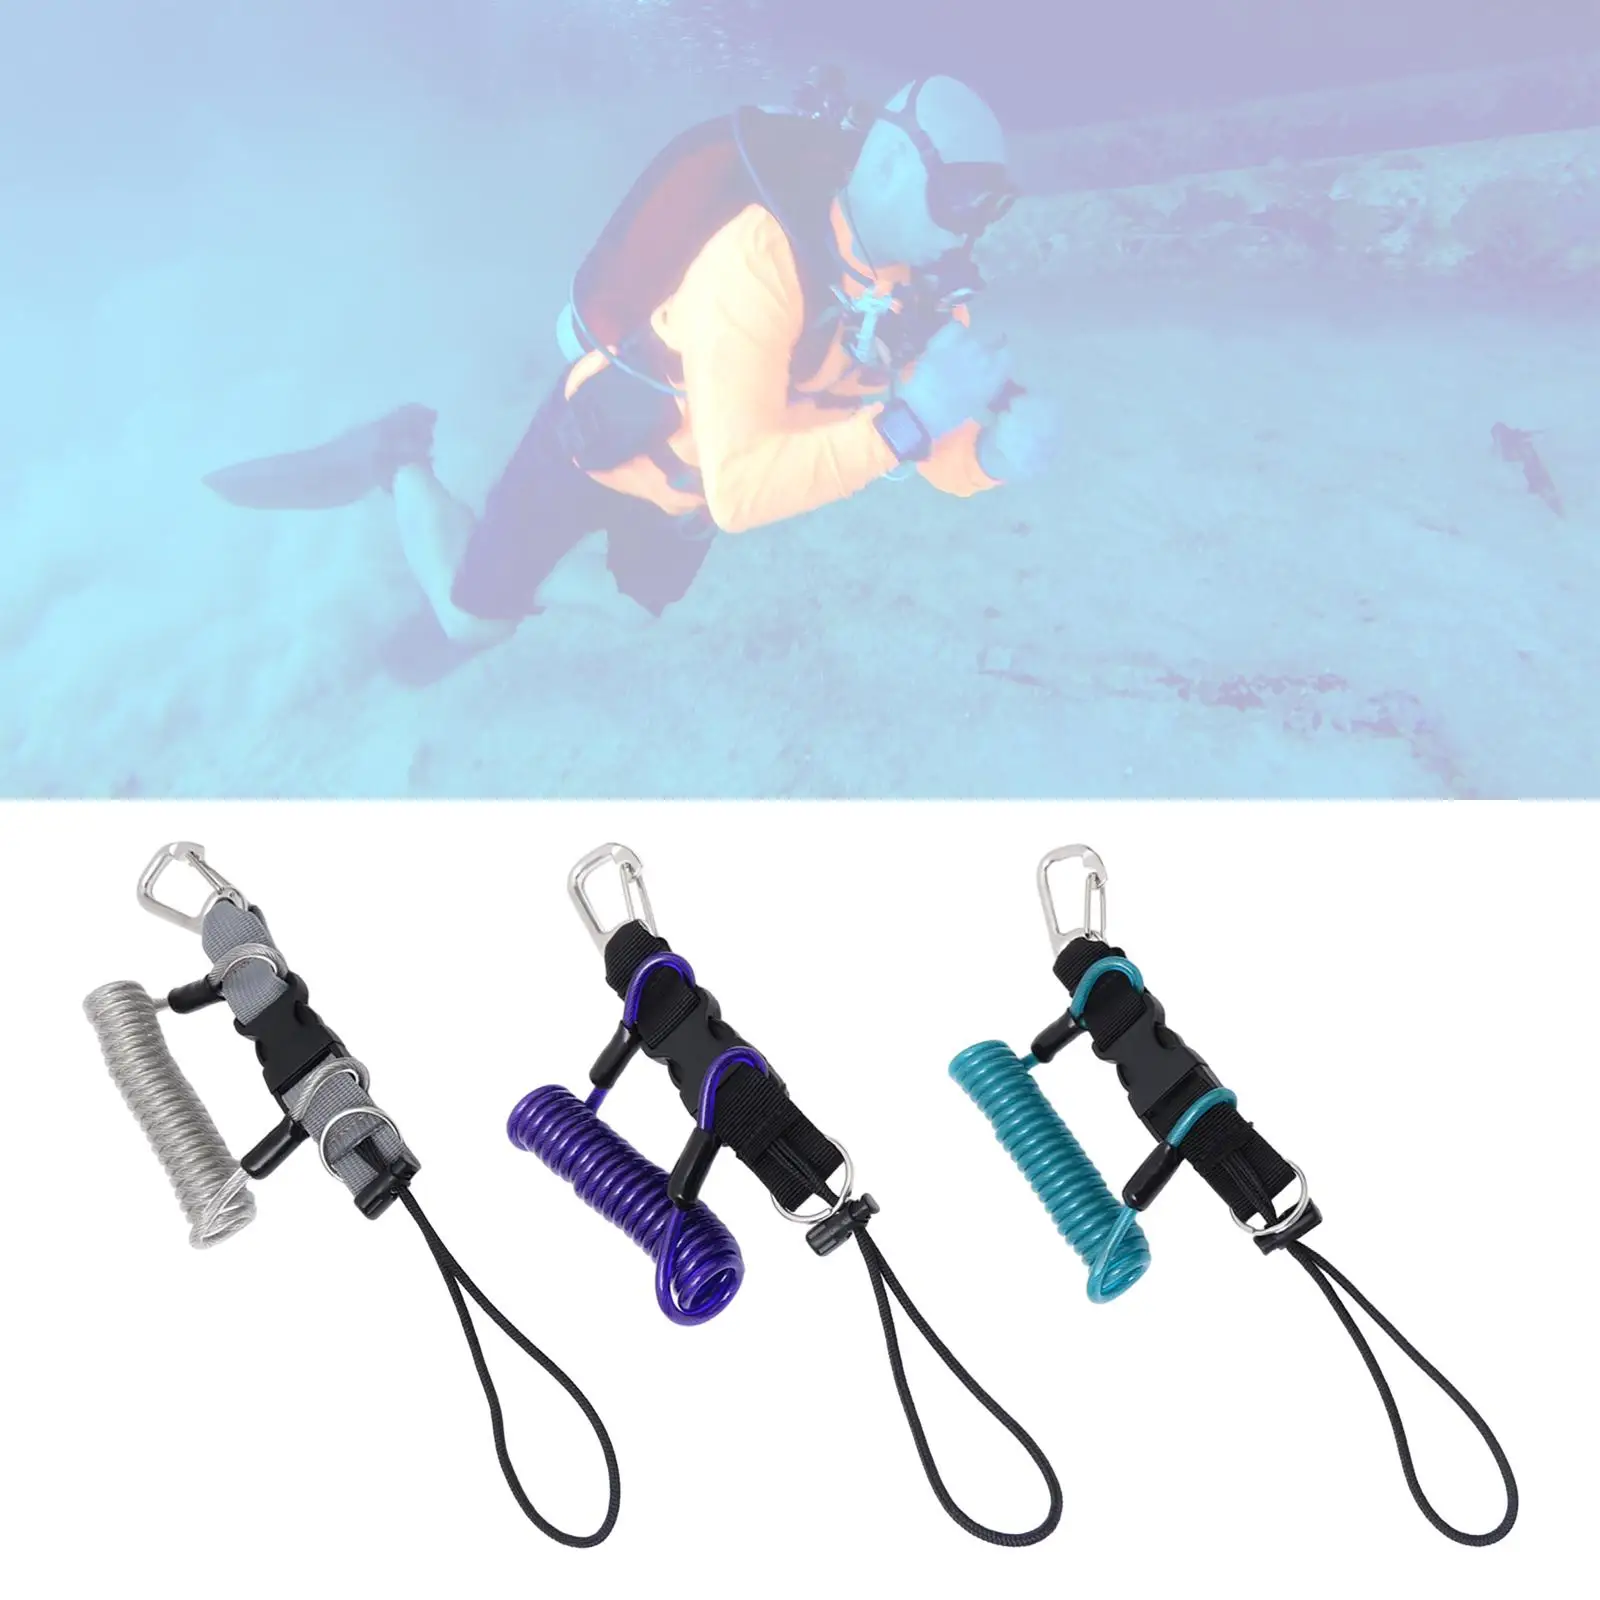 Scuba Diving Lanyard Professional Anti Lost Cable Freediving Lanyard Rope for under Water Sports Underwater Snorkeling Lights